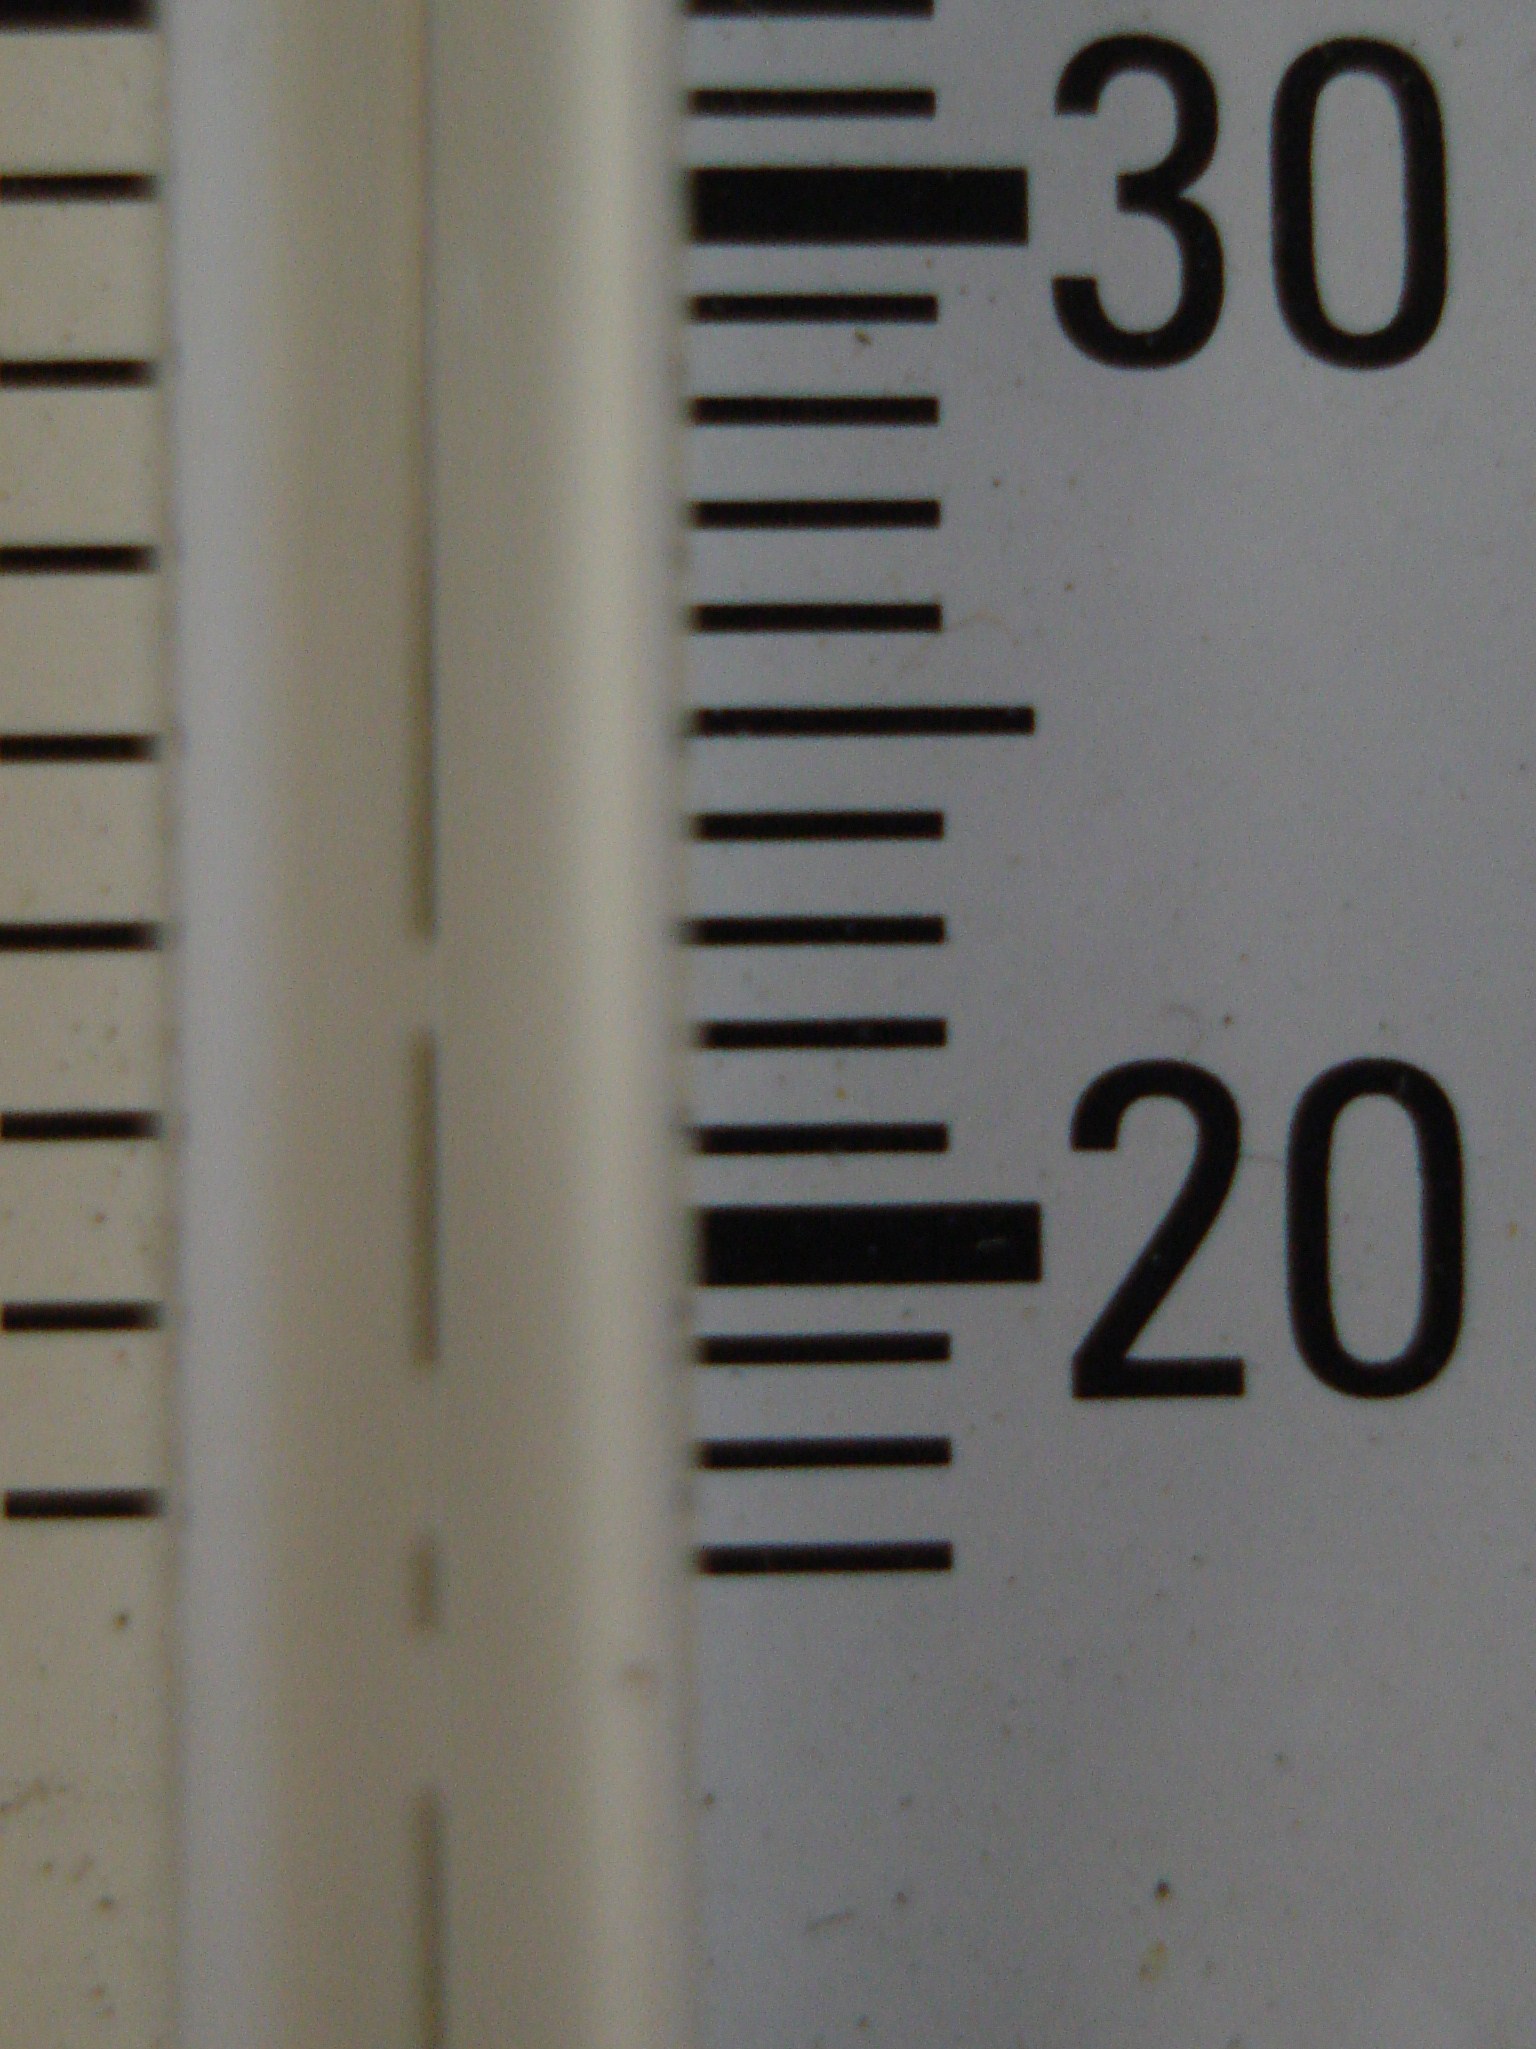 Figure 3. The fluid show in this thermometer has separated and the unit needs to be replaced